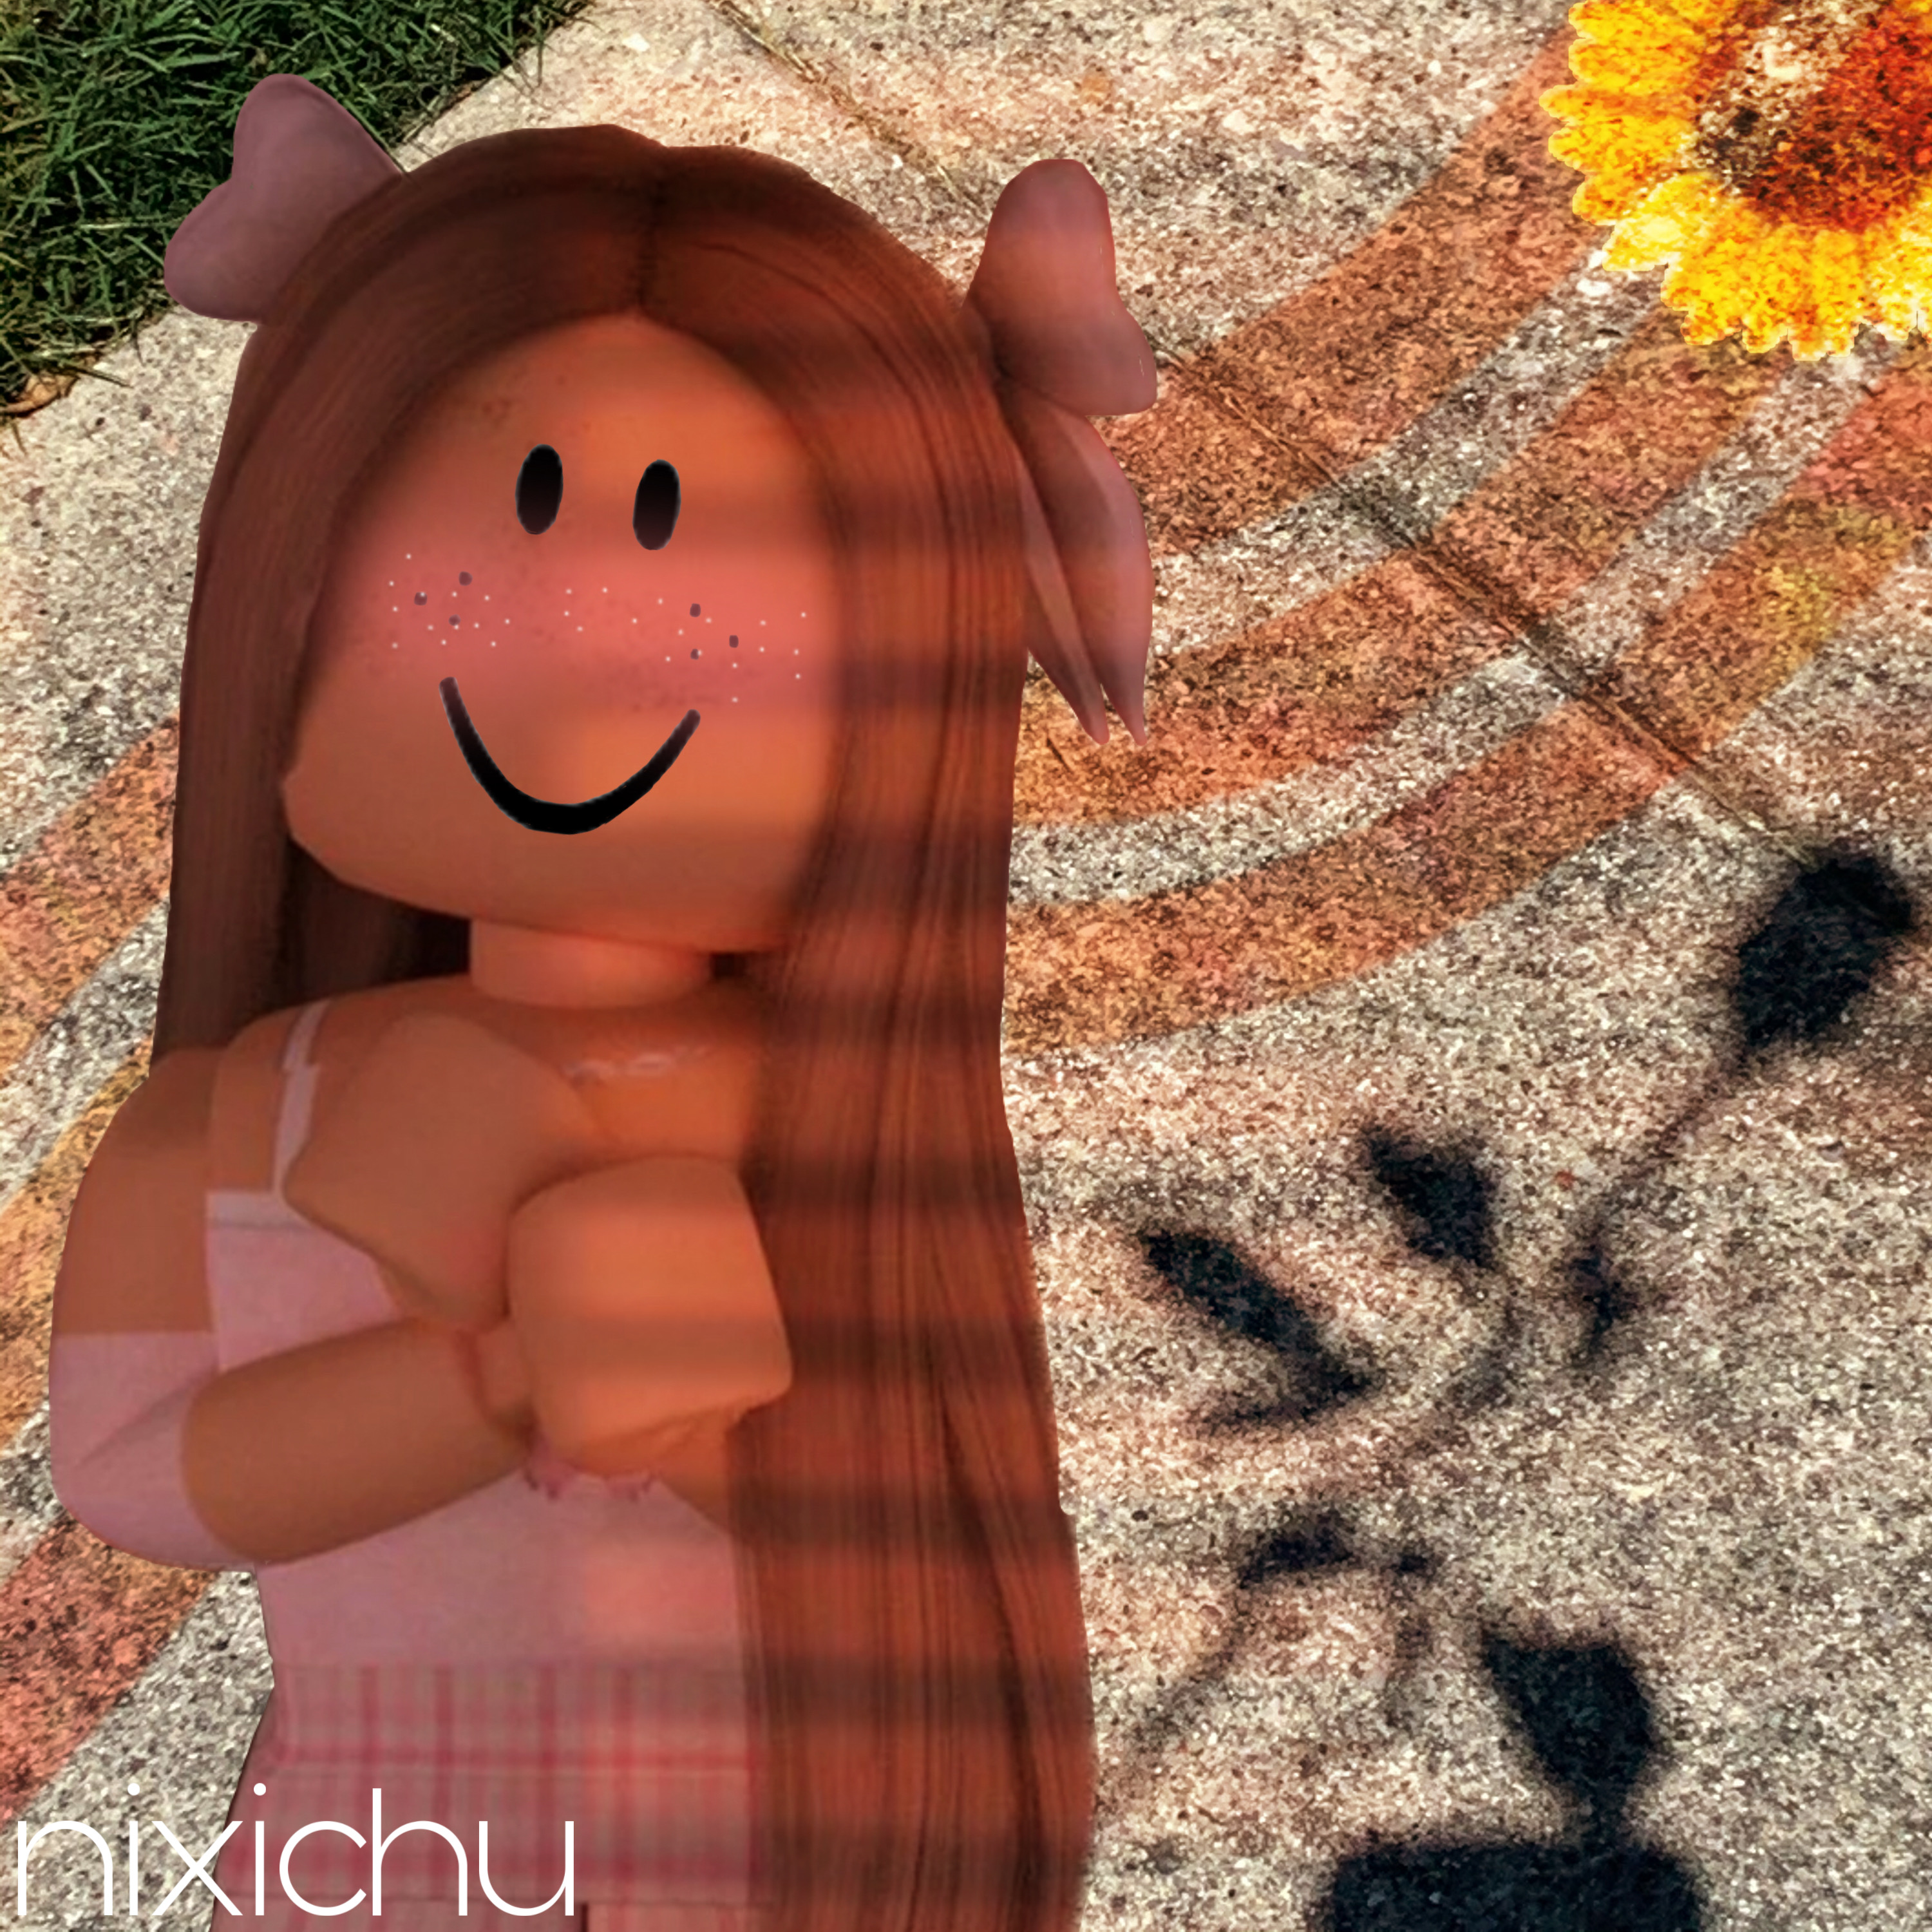 Robloxgfx Girl Robloxgirl Rblx Cute Image By Nixichu - roblox girl background sunflower